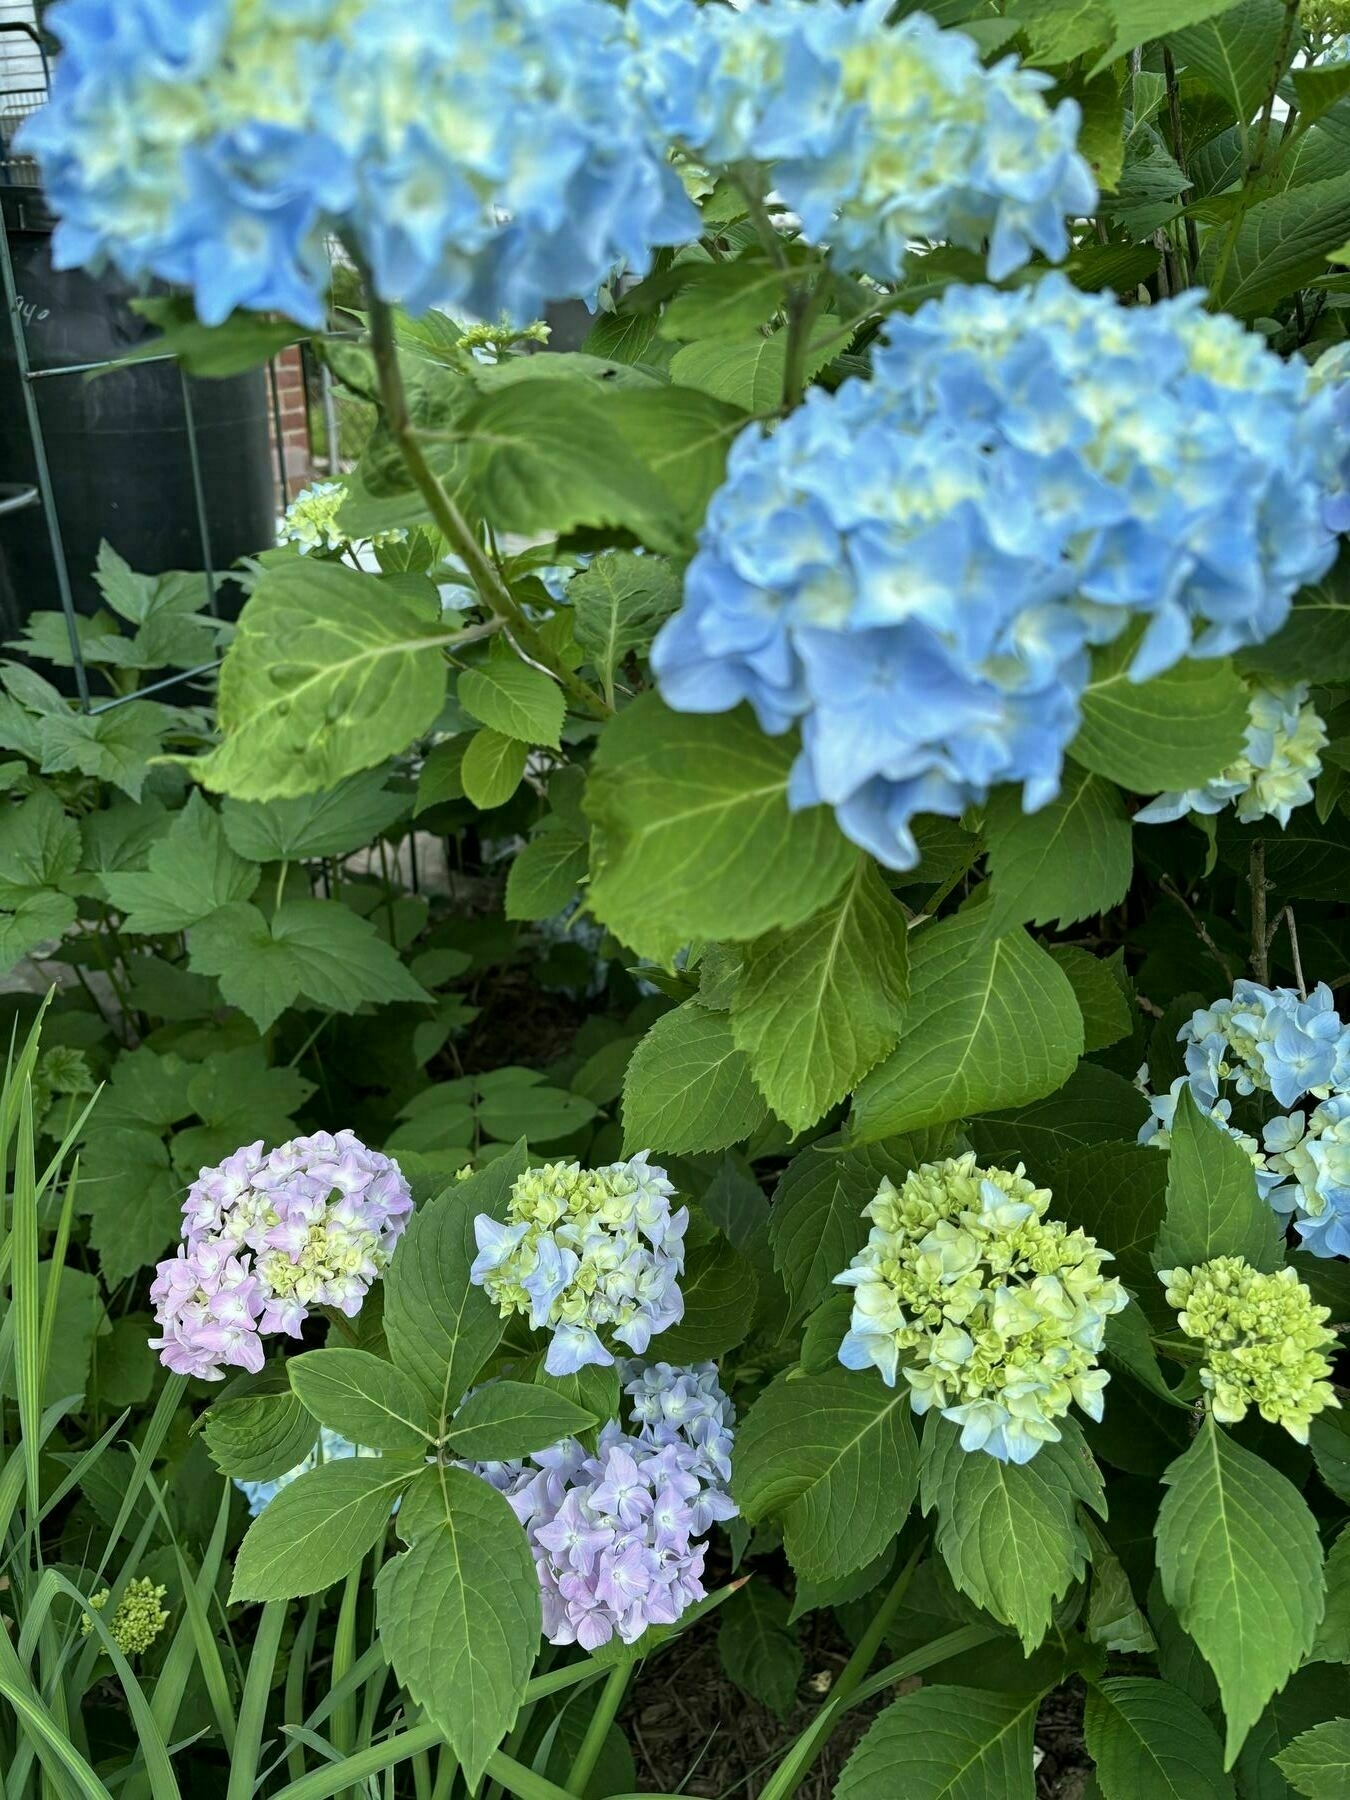 hydrangea blossoms, blue and pink on same plant